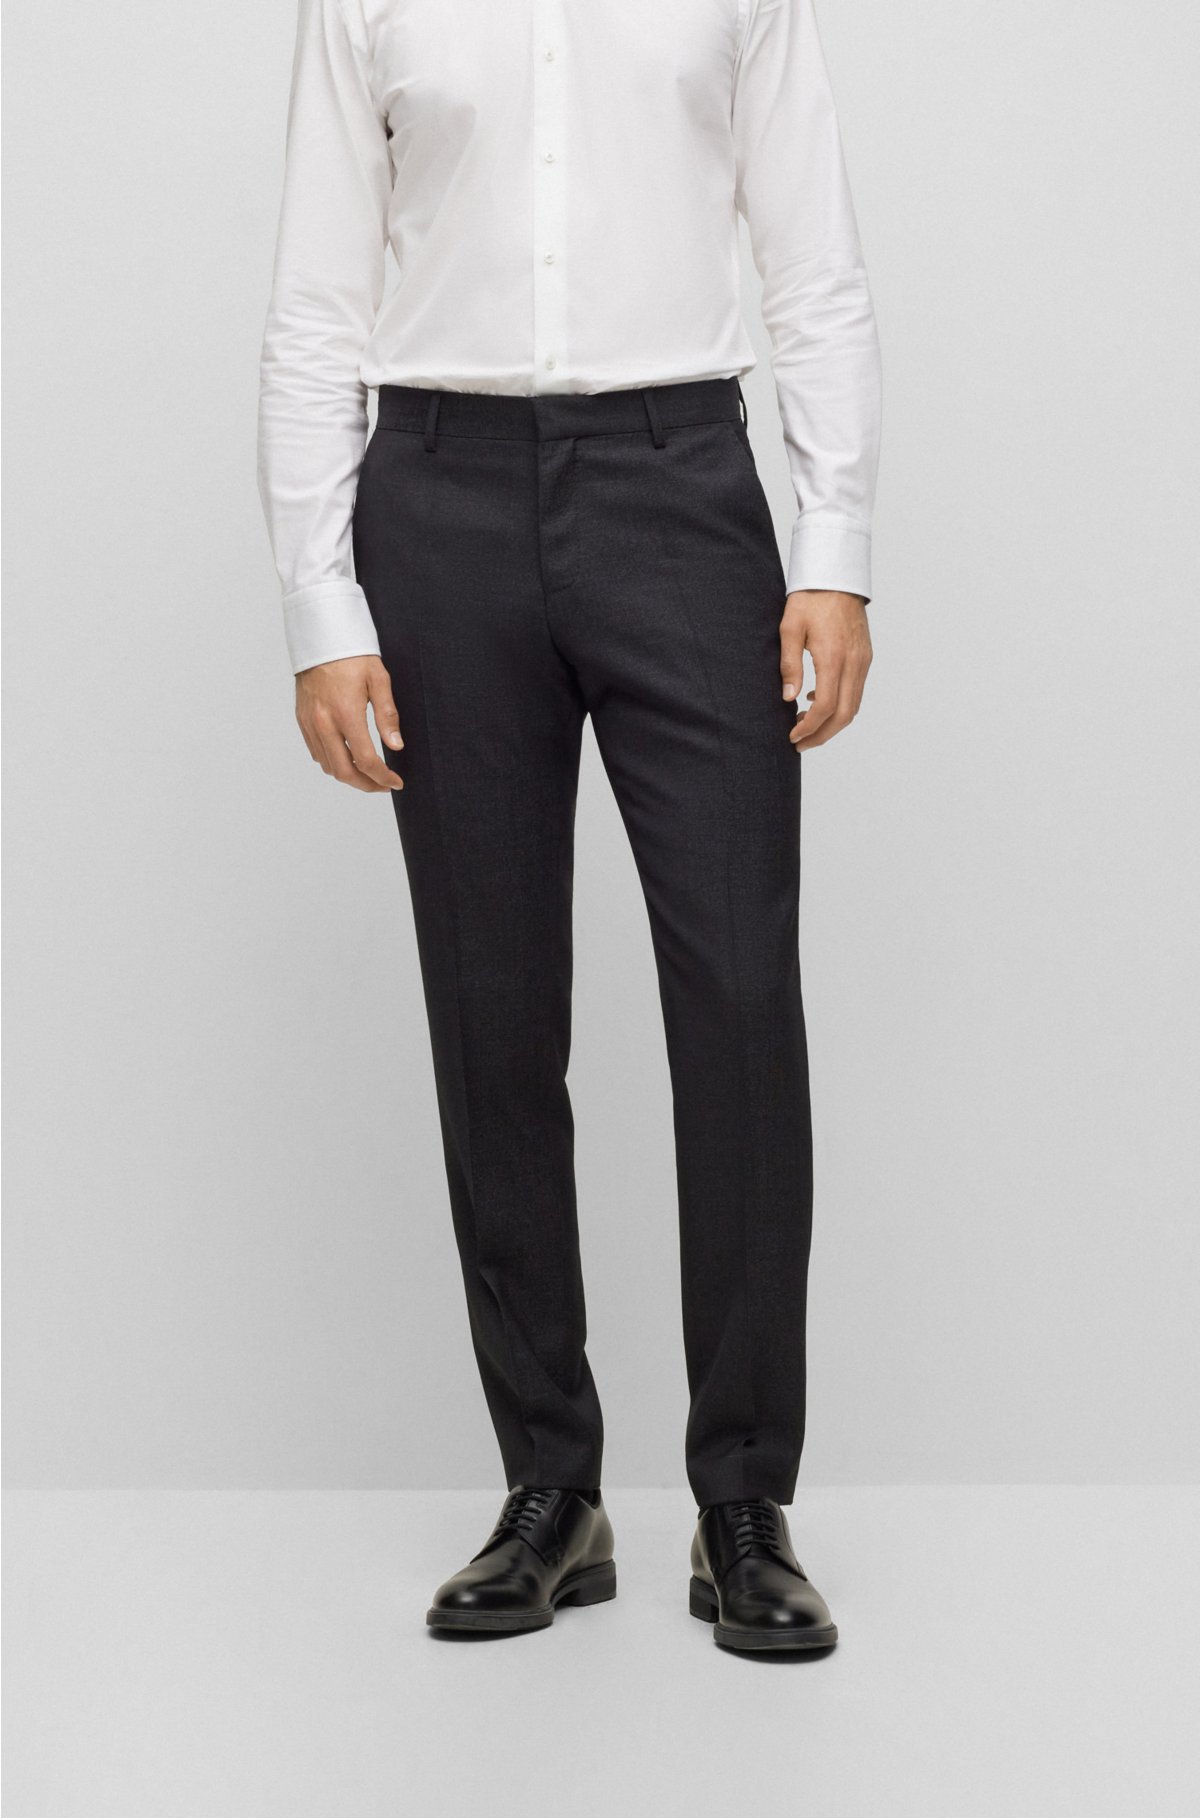 formal pant shirt black - Online Exclusive Rate- OFF 71%